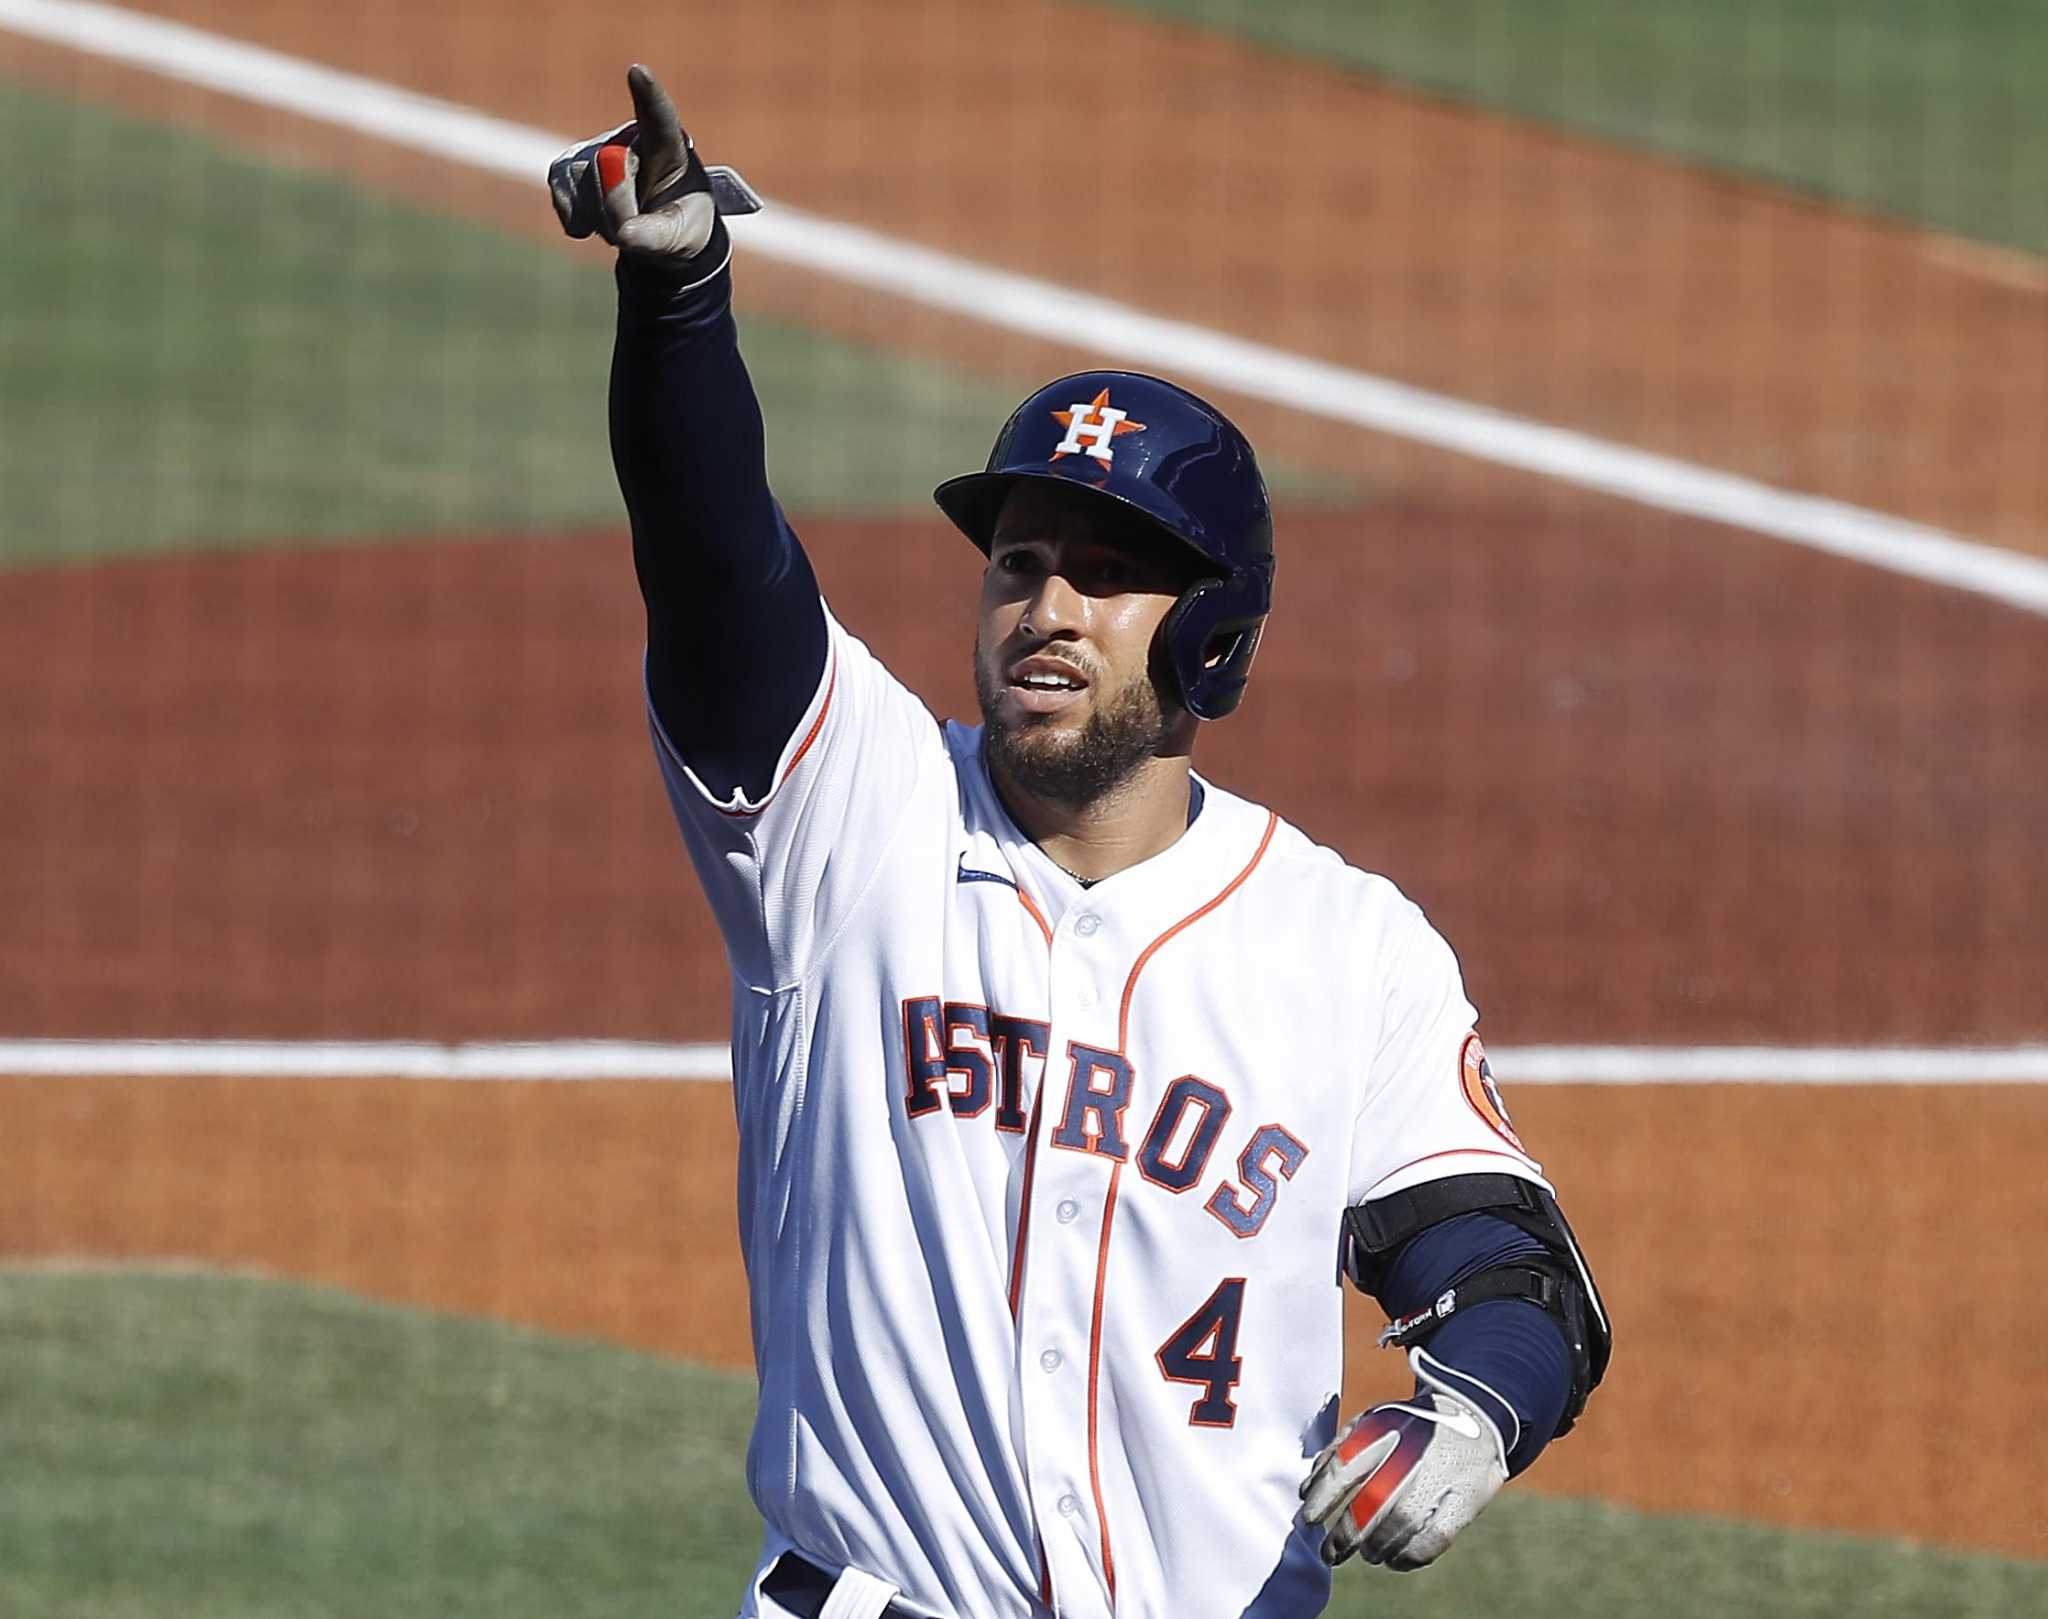 MLB rumors: Carlos Correa 'built' to play for Yankees, ex-outfielder says 